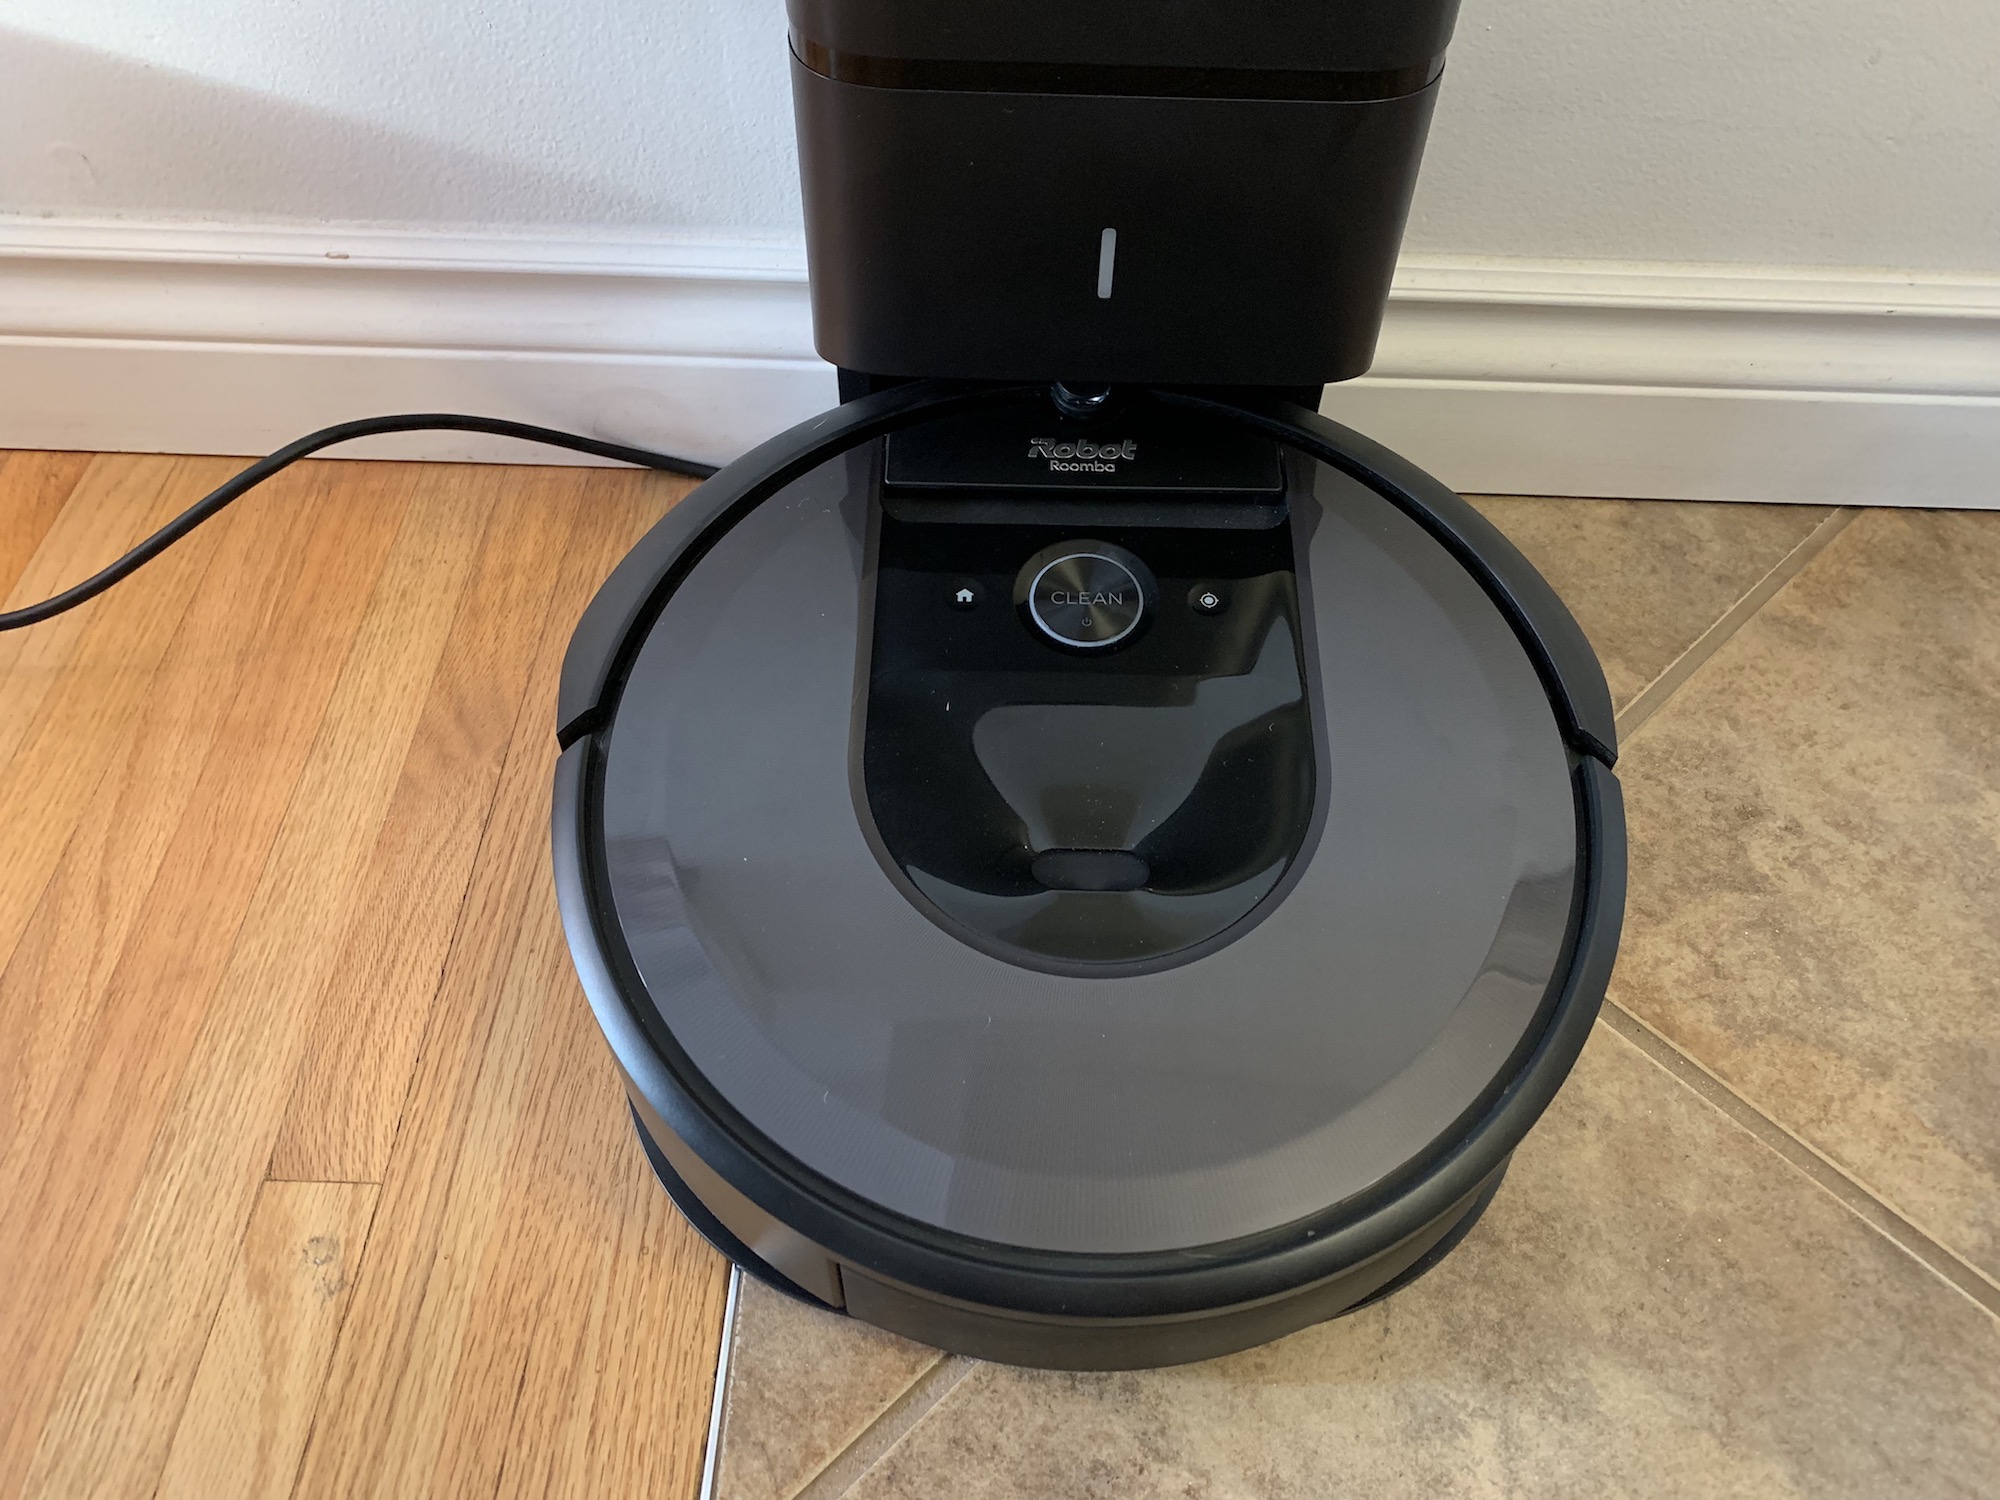 Setting Up Your Roomba vacuum cleaner